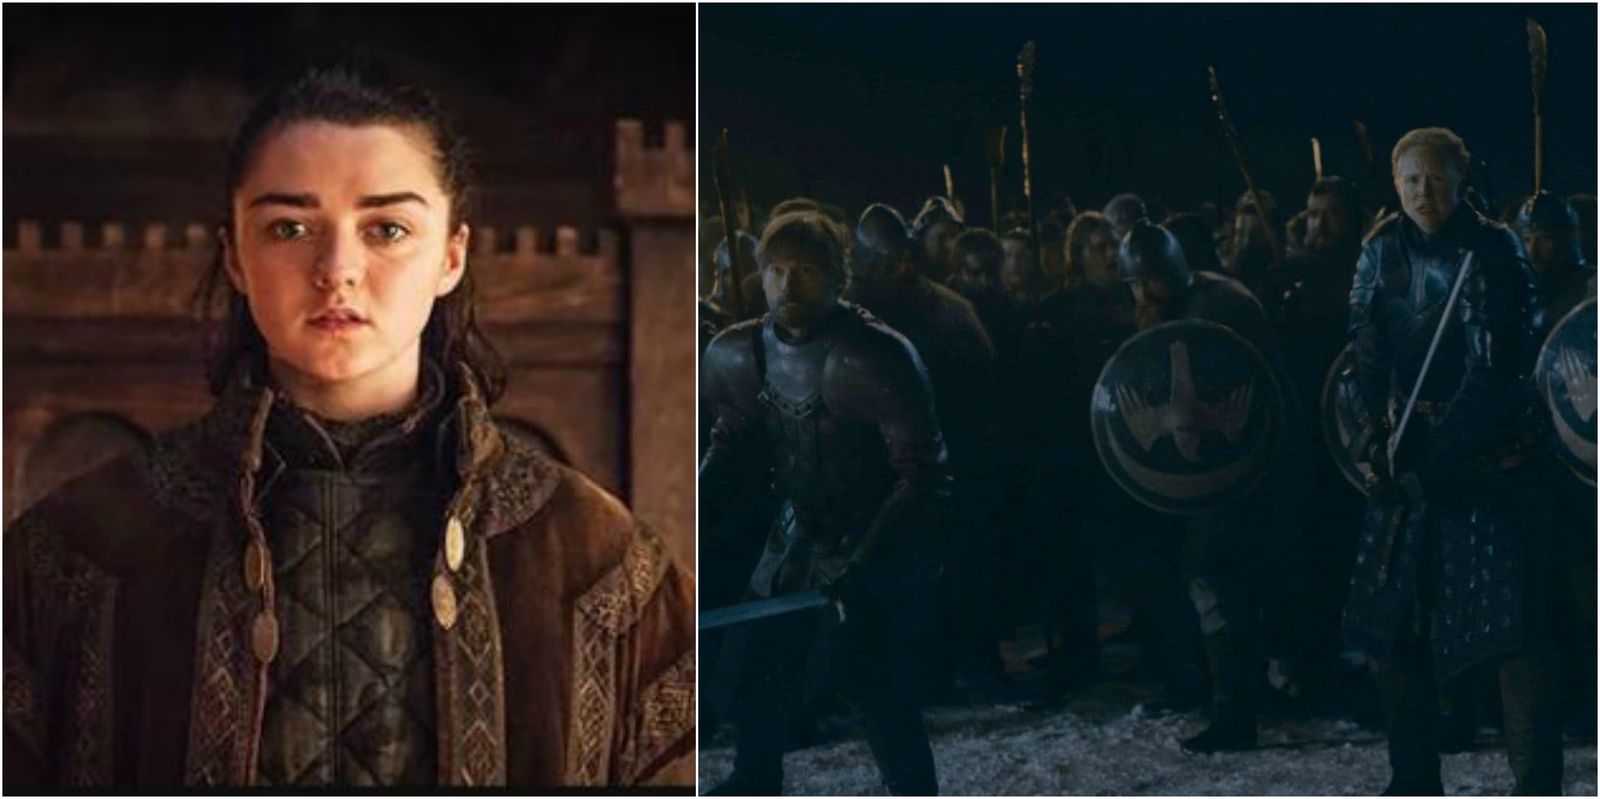 Game of Thrones Season 8 Episode 3 Review: Forget Battle Of Bastards Or Red Wedding, This Is THE EPISODE That Will Haunt You Forever